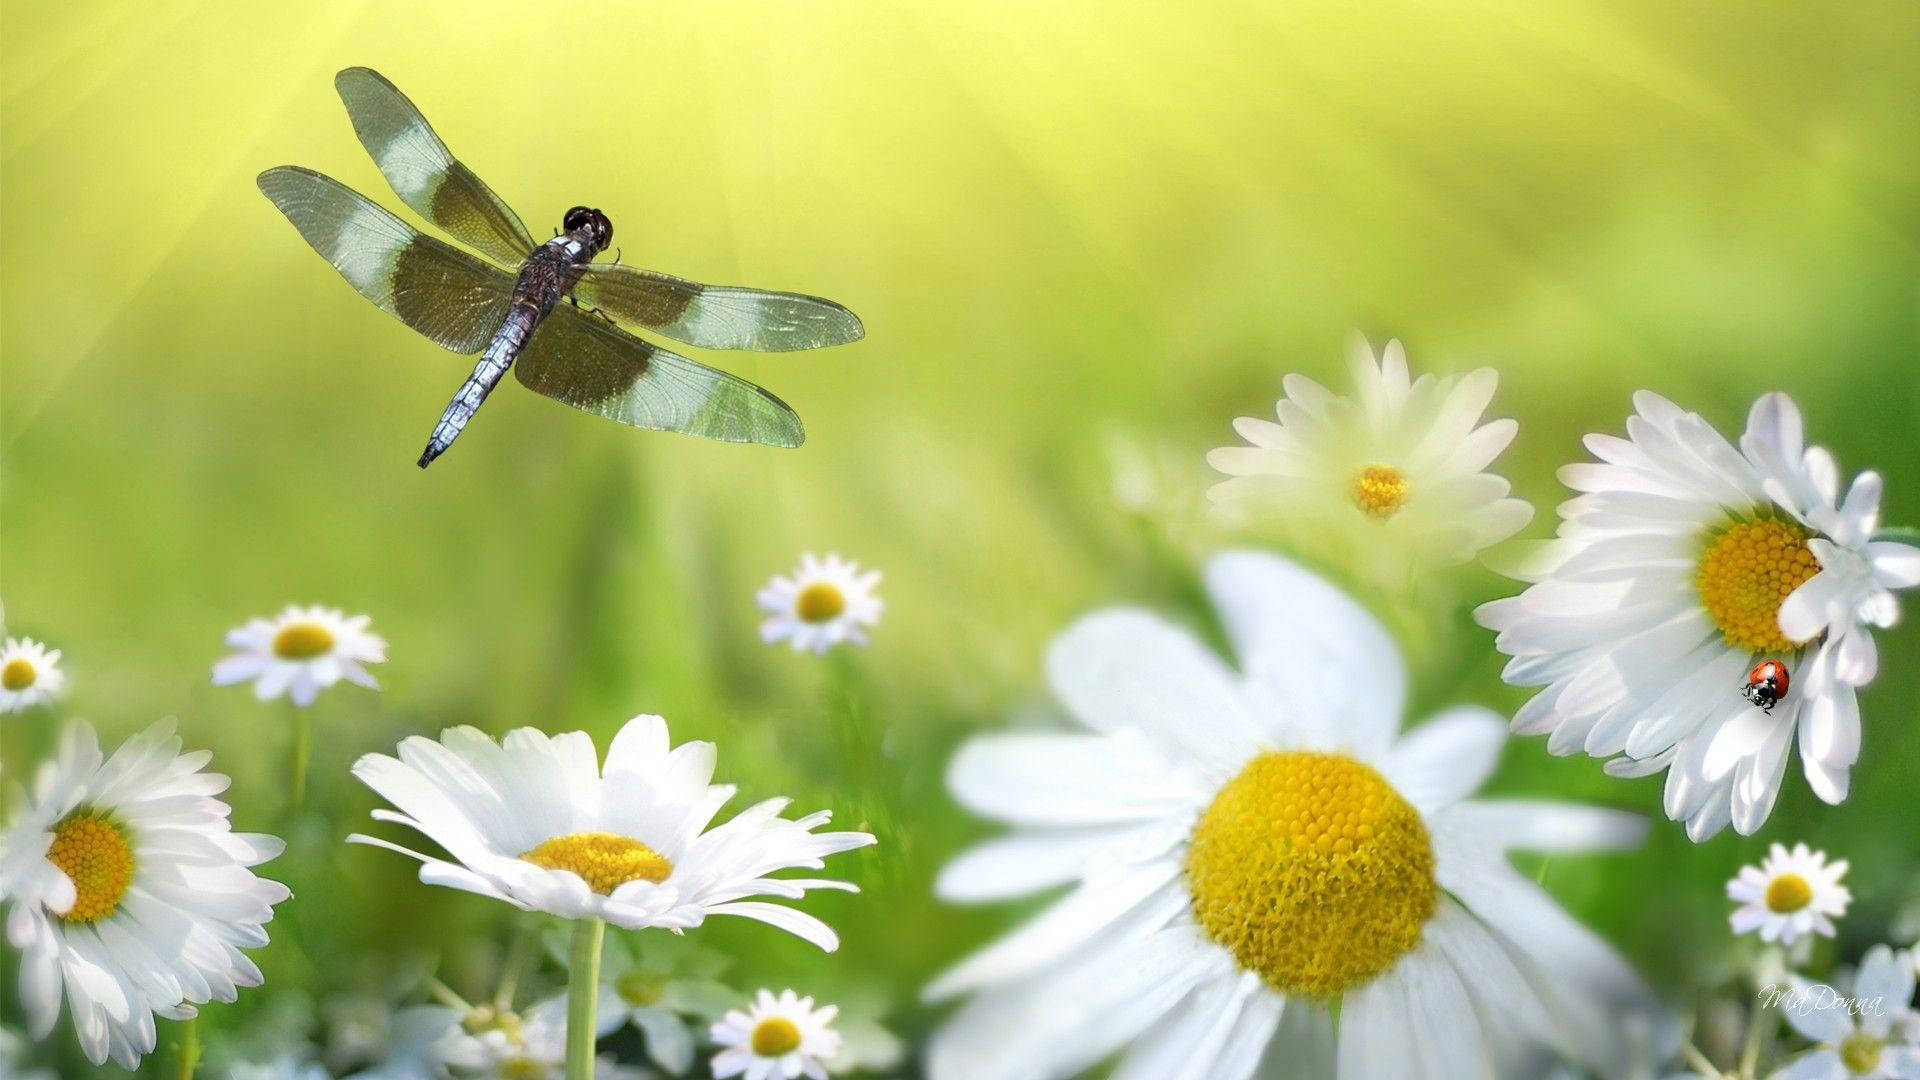 Dragonfly Above White Daisies